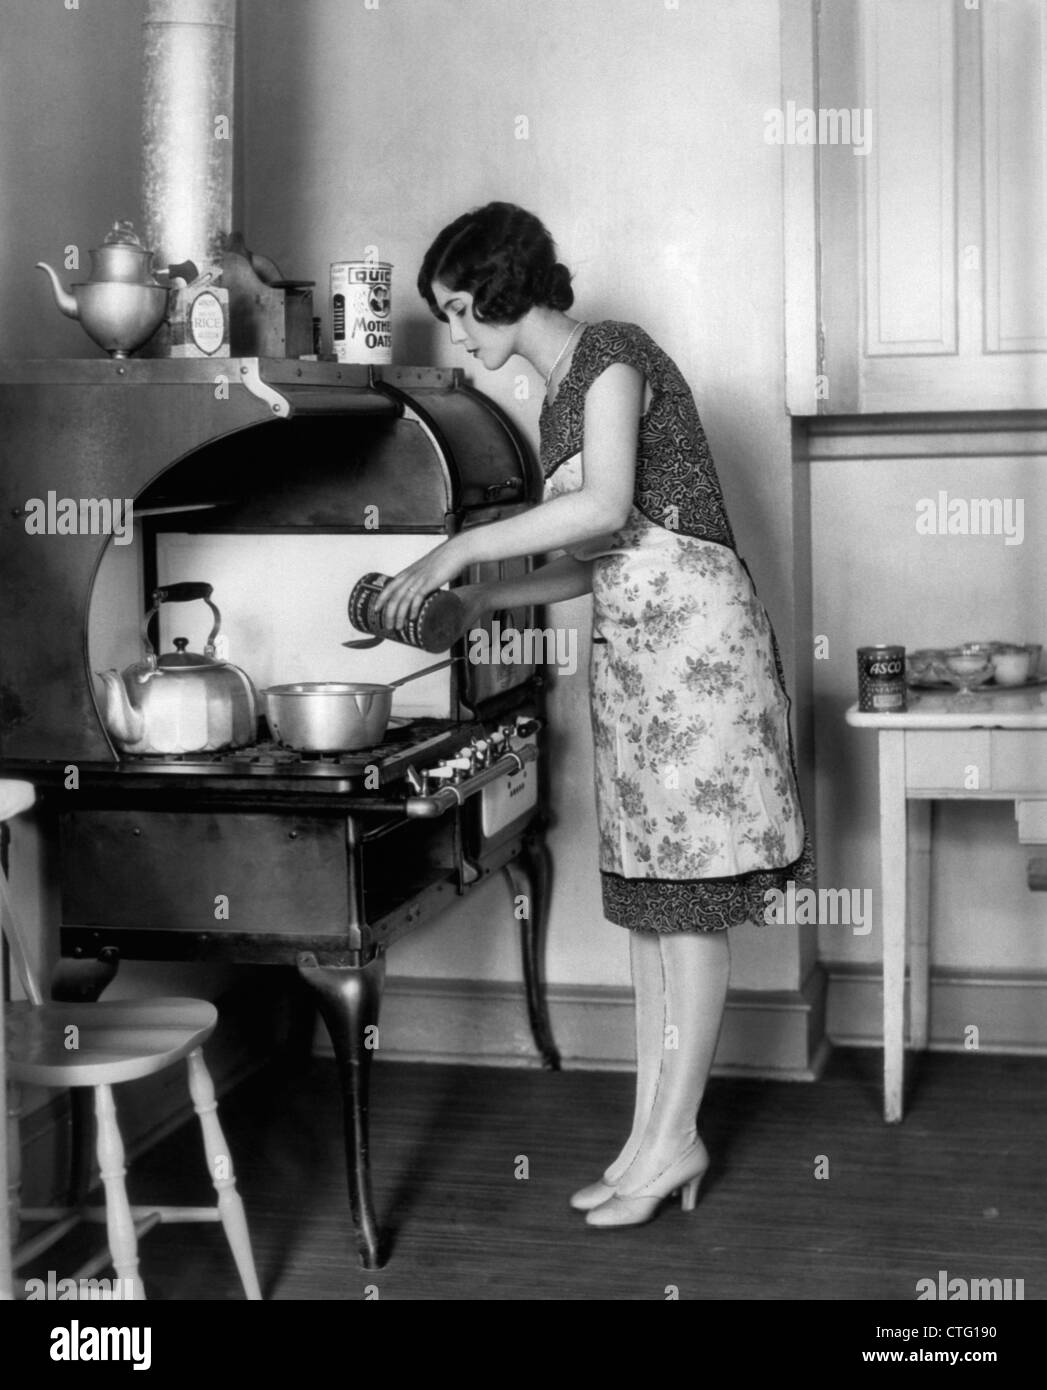 1920s HOUSEWIFE AT STOVE COOKING Stock Photo